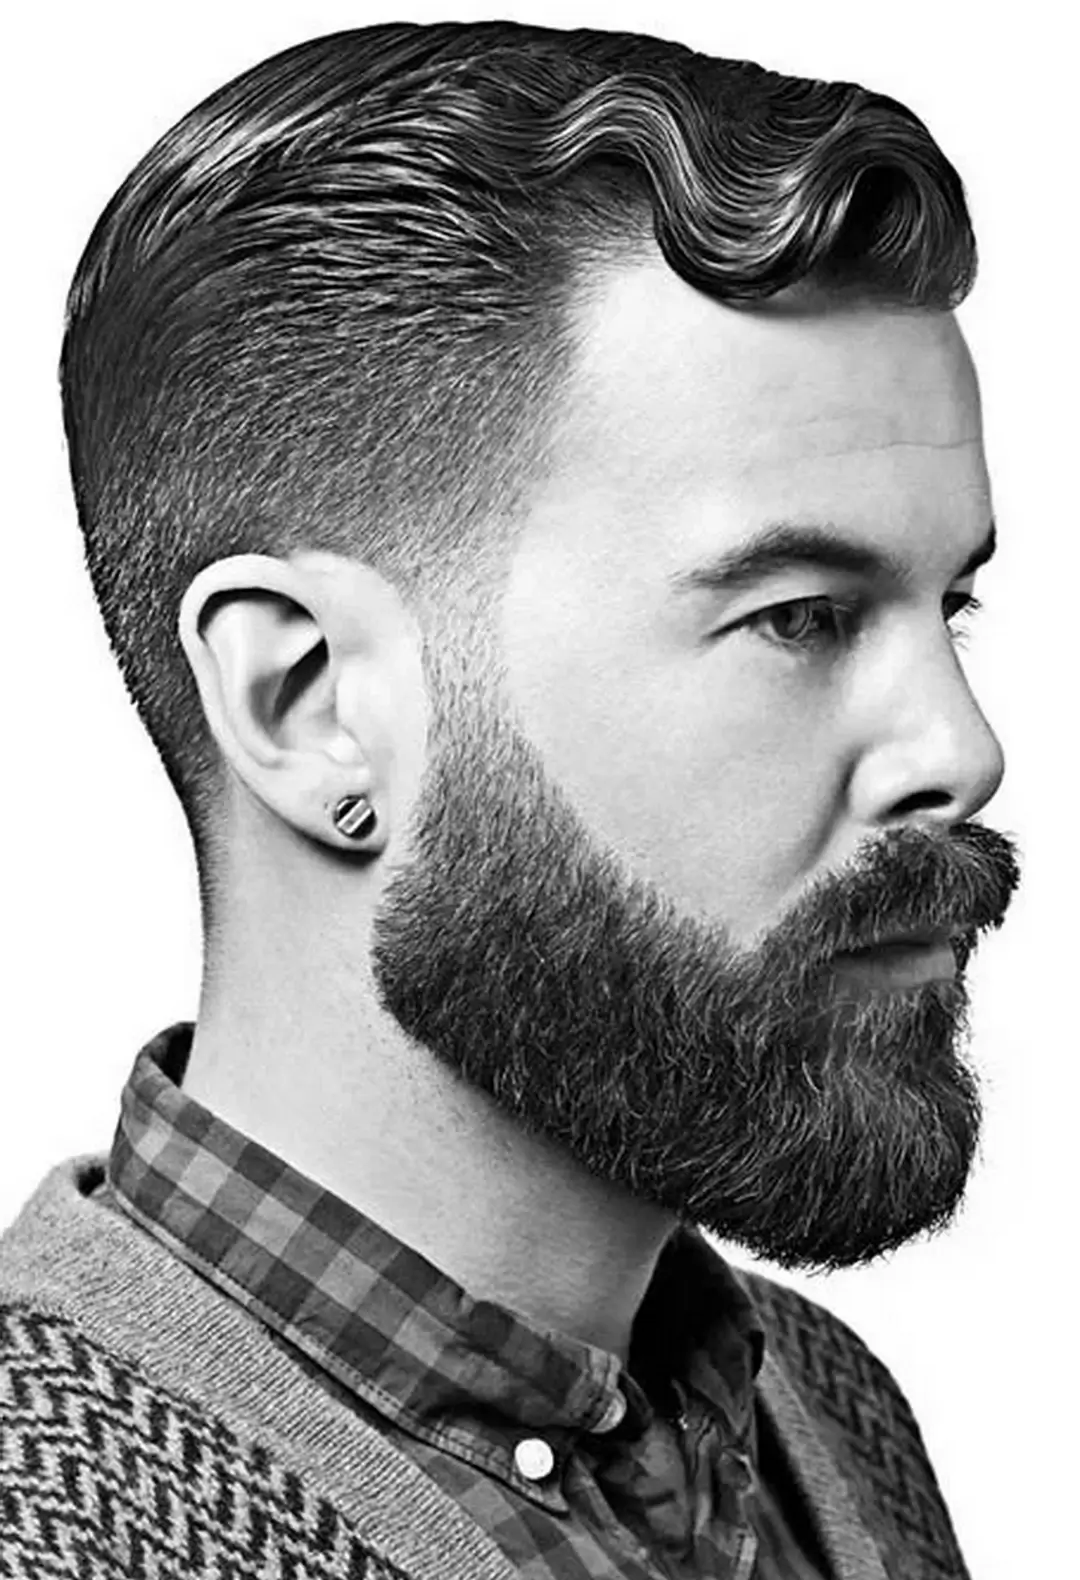 Men's Taper Fade Haircut from Fifth Ave Barber Shop in Midtown NYC